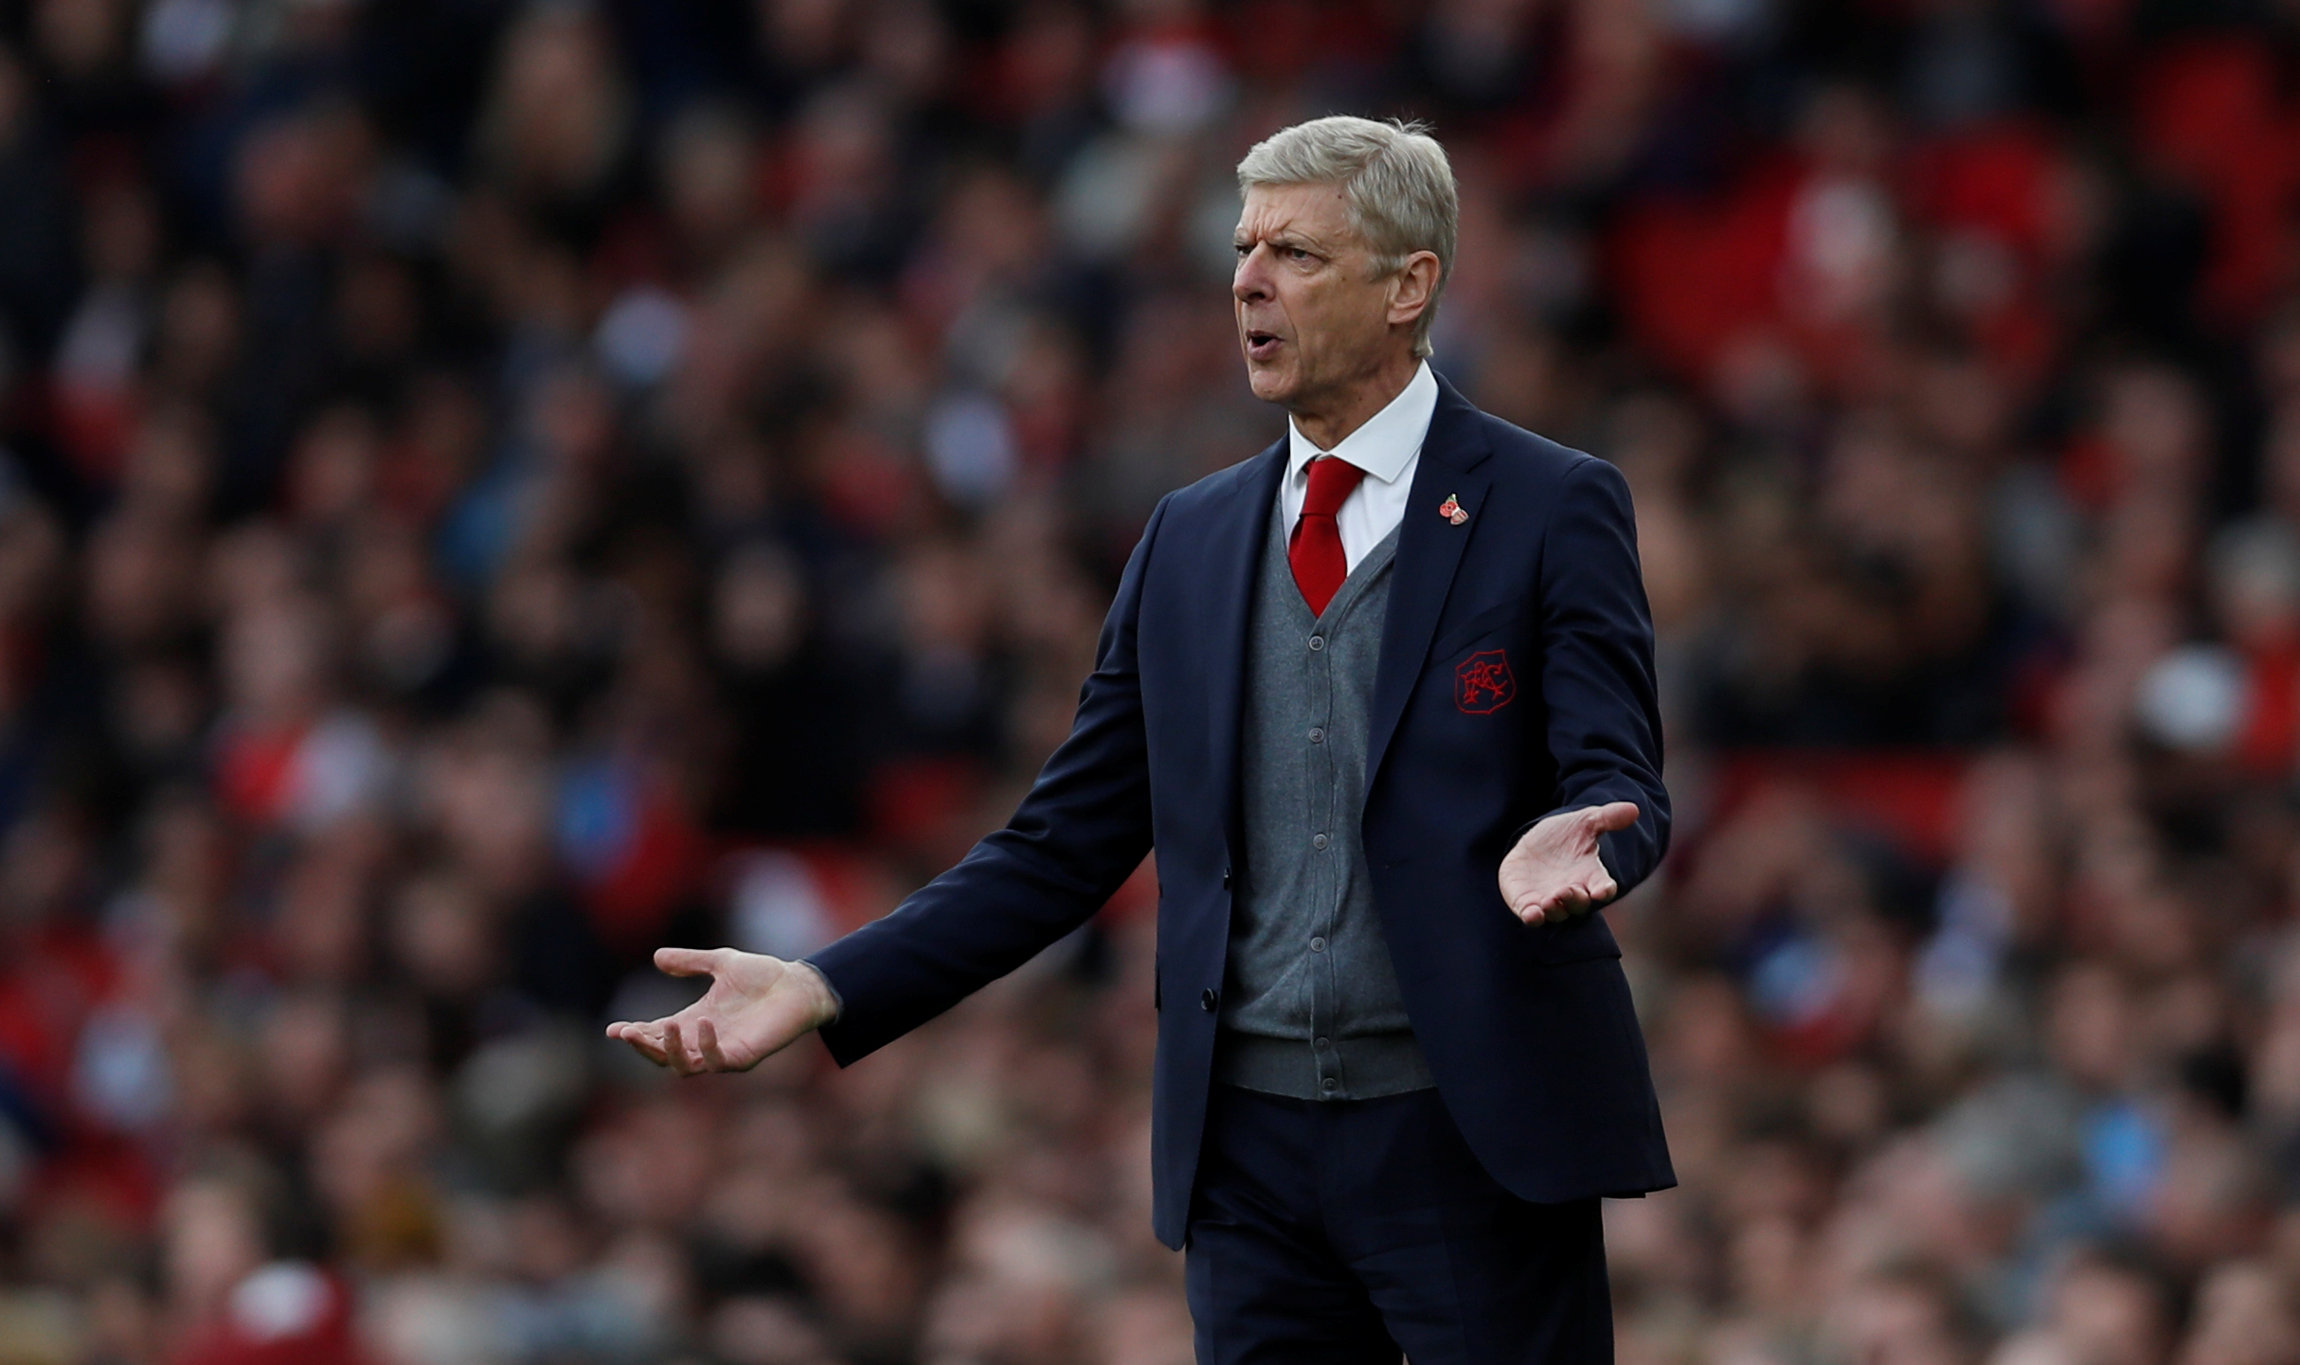 Football: No worries about playing Sanchez against City, says Wenger